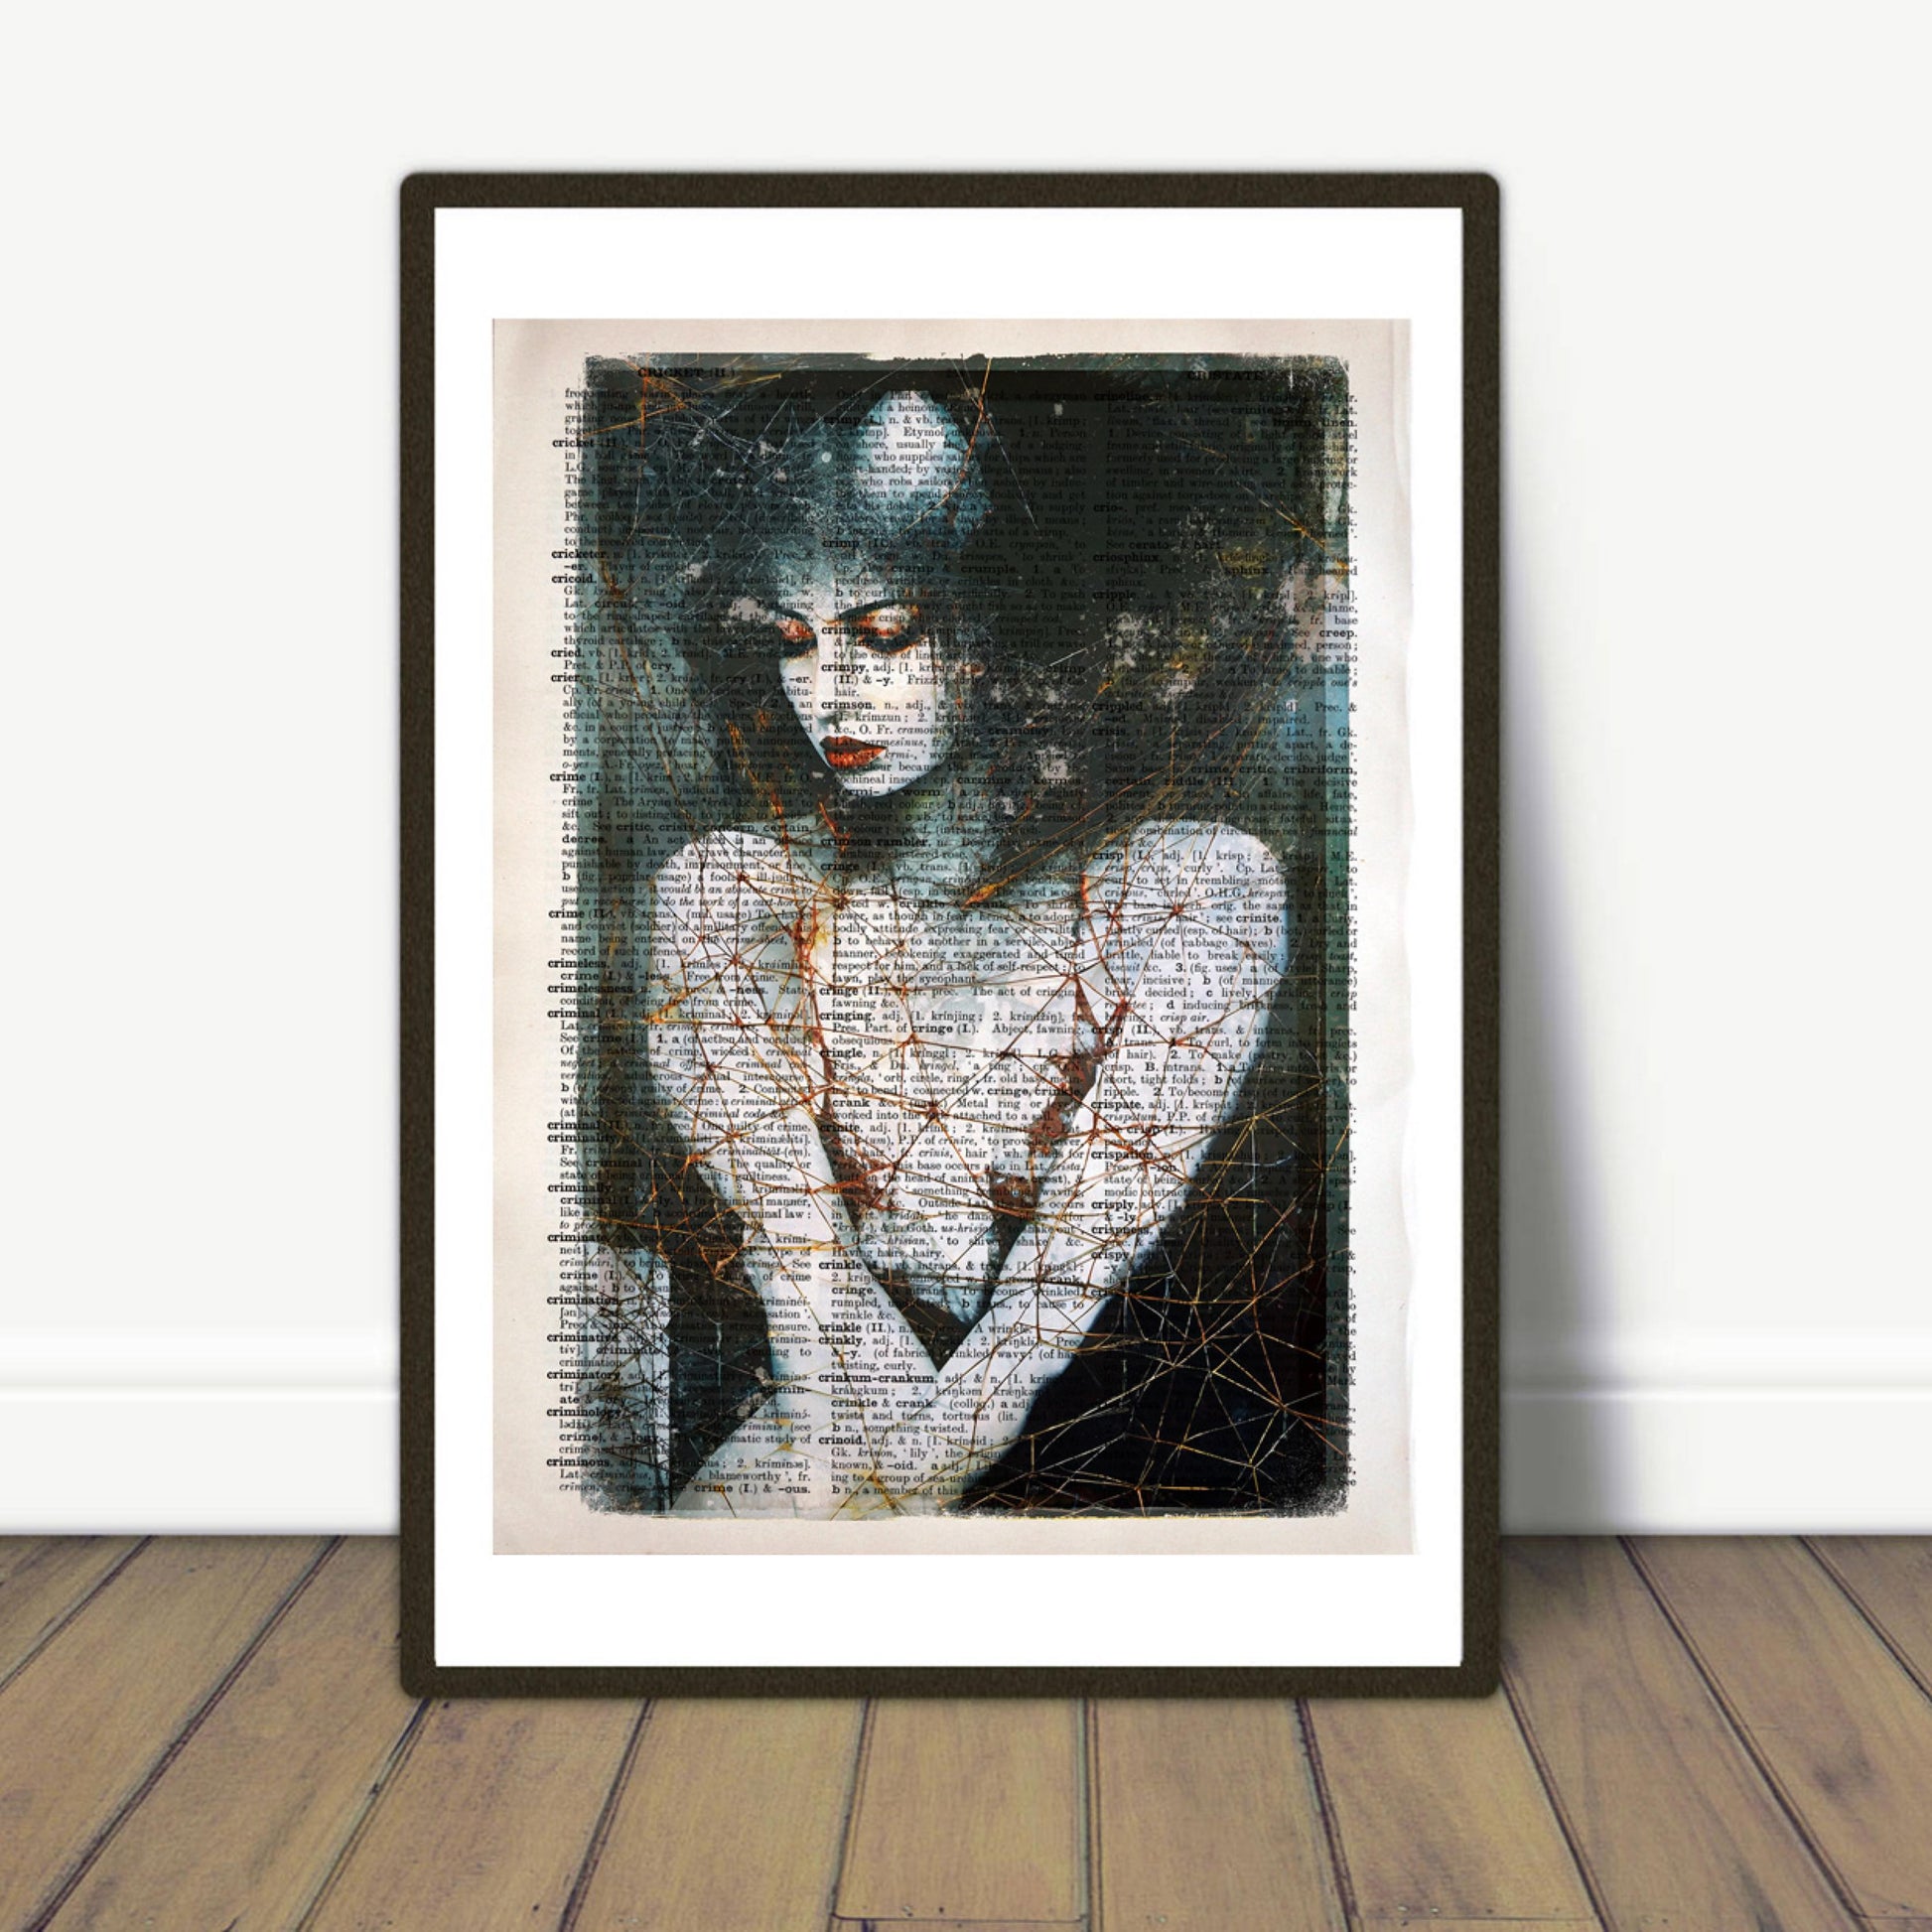 Vintage dictionary page transformed into art: Entwined Melancholy Dreams print.